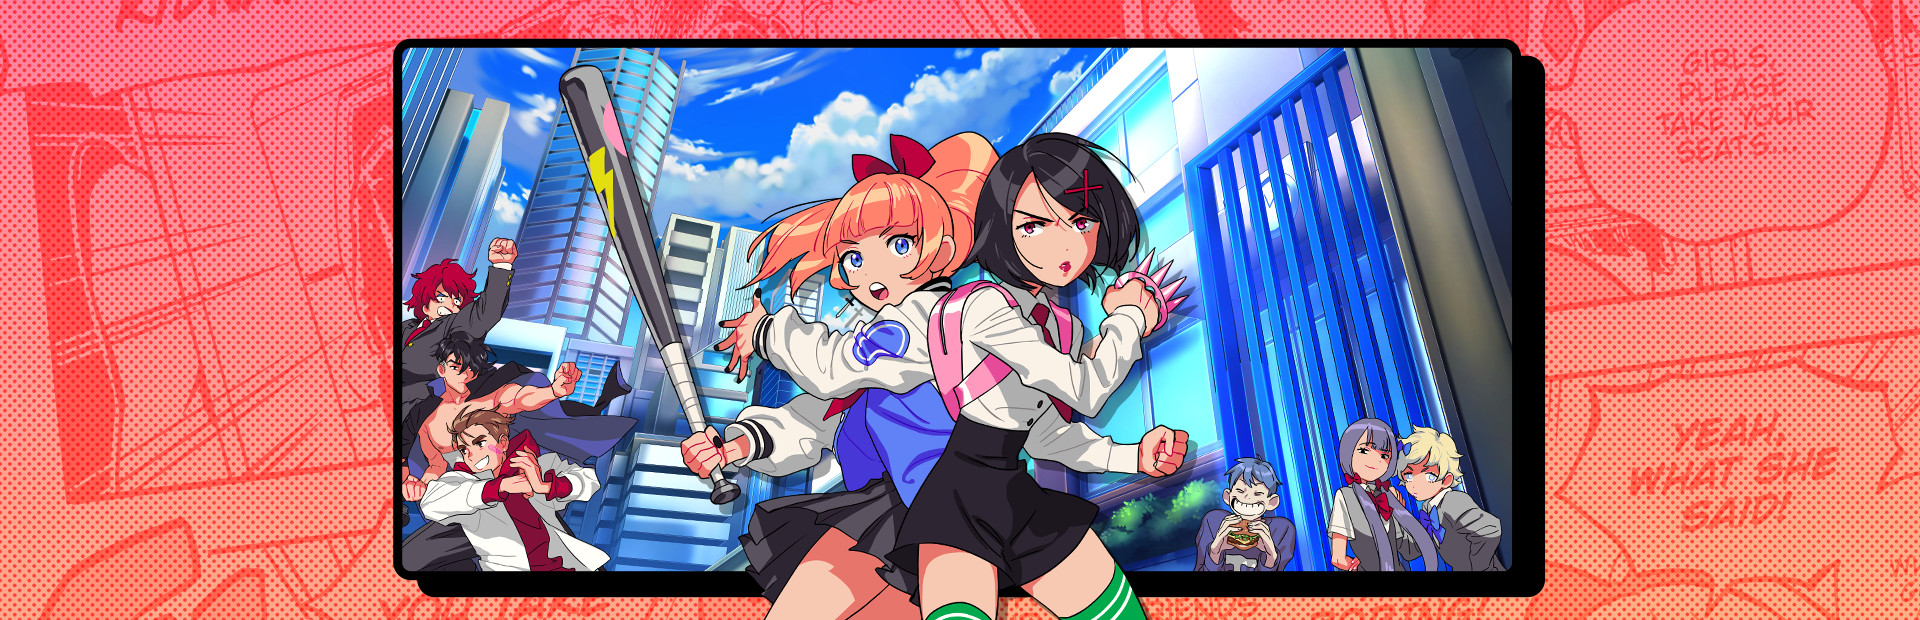 River City Girls cover image